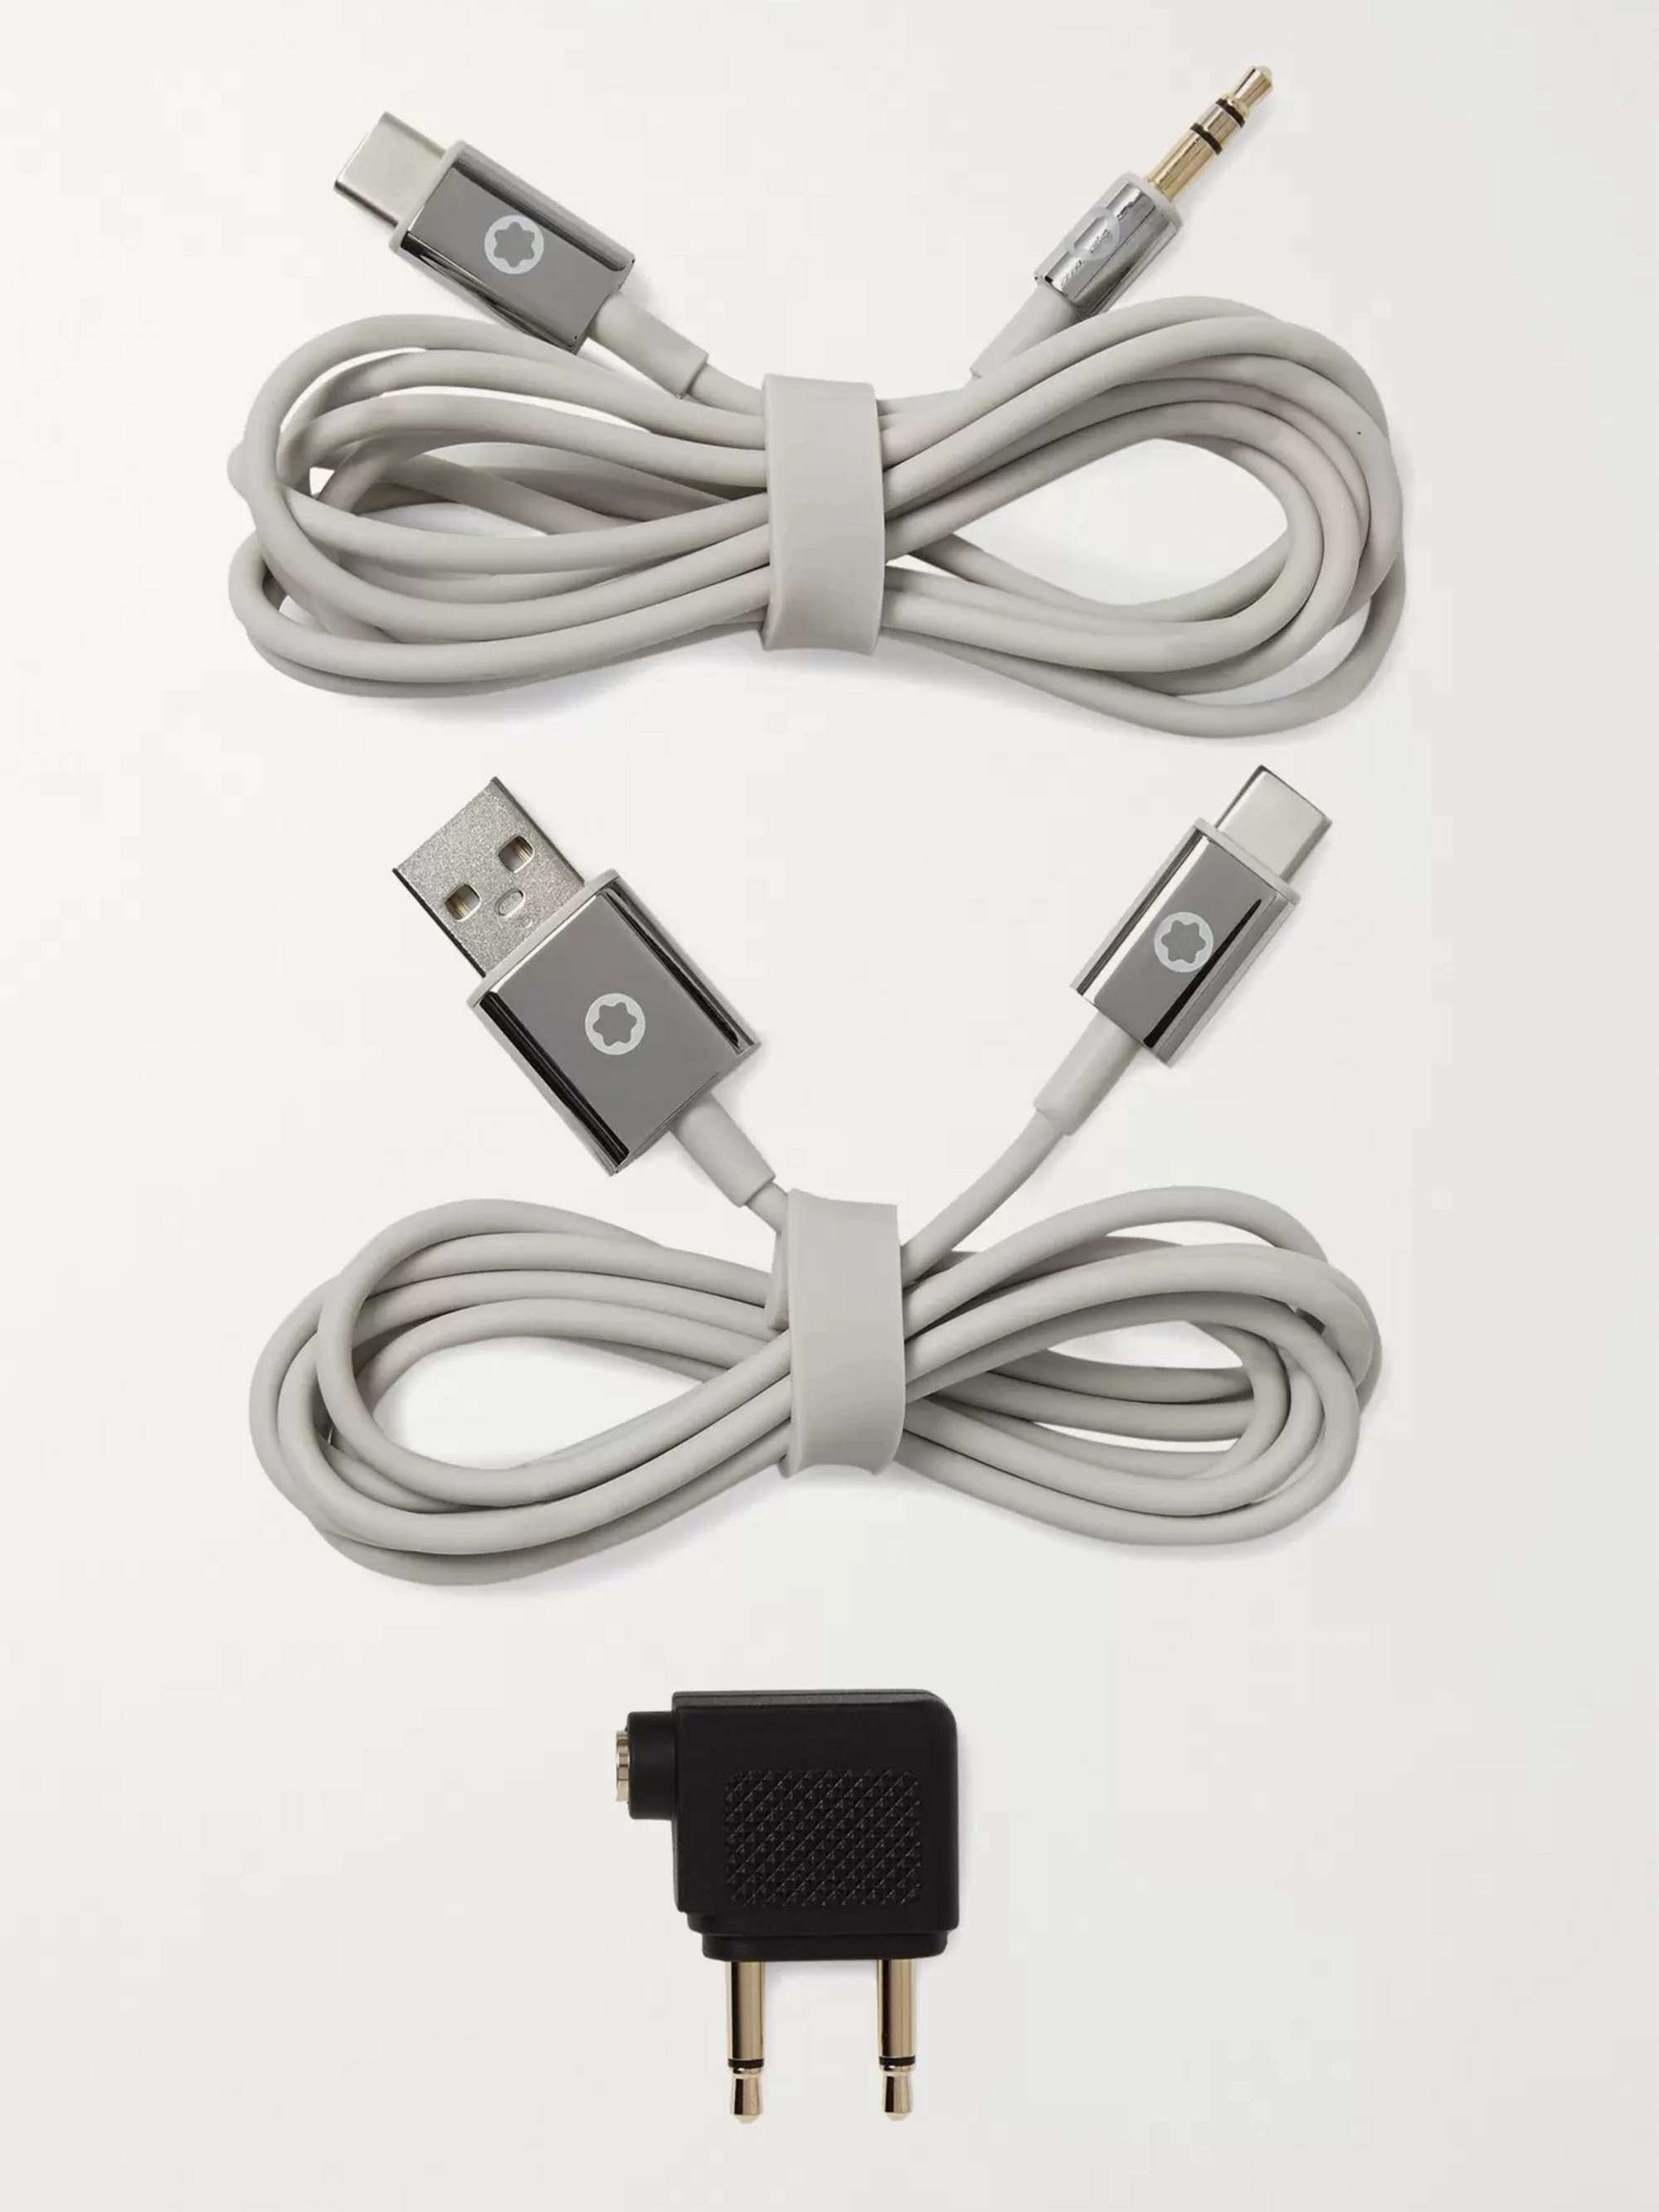 MONTBLANC MB 01 Travel Charger and Cable Set